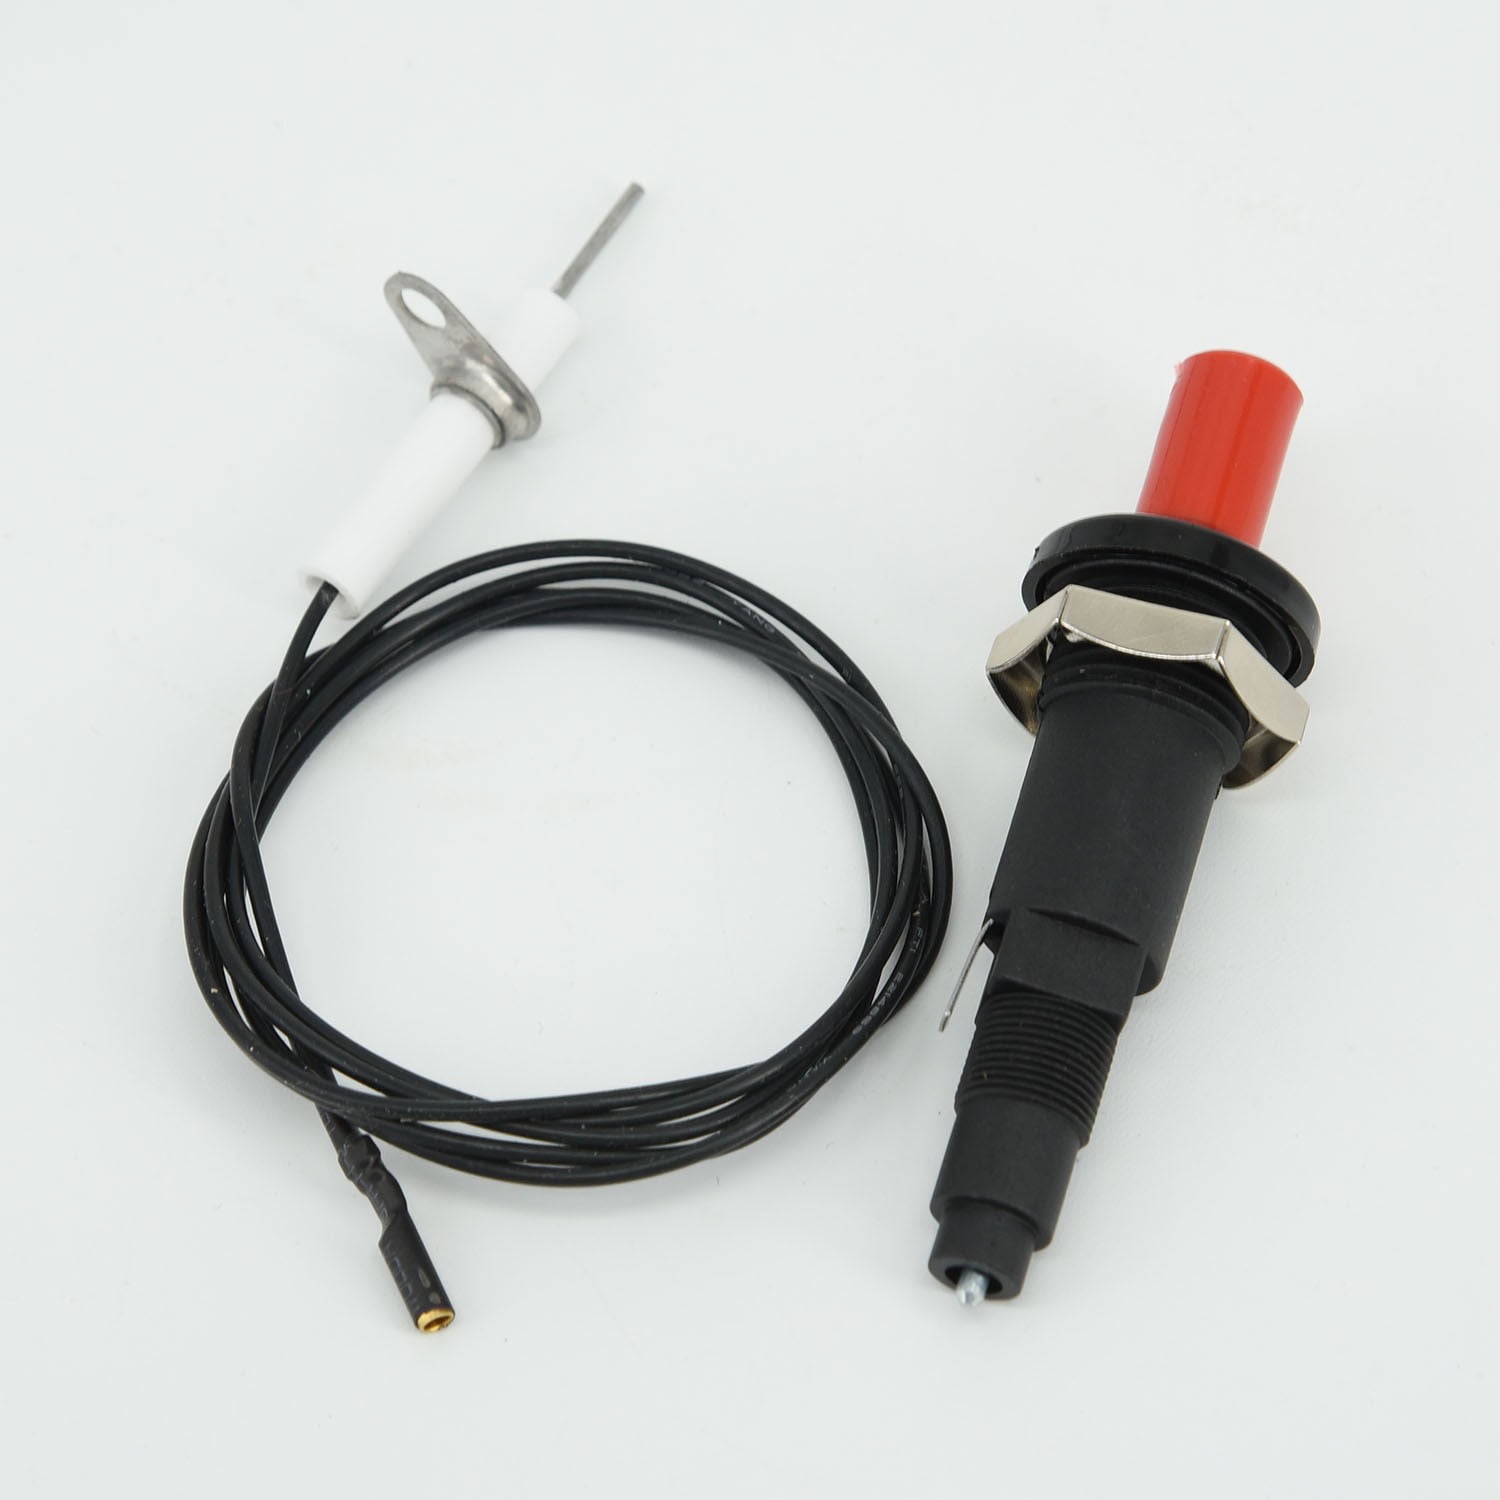 Piezo Spark Ignition Push Button Igniter For Gas Grill BBQ Kit Cable Universal 